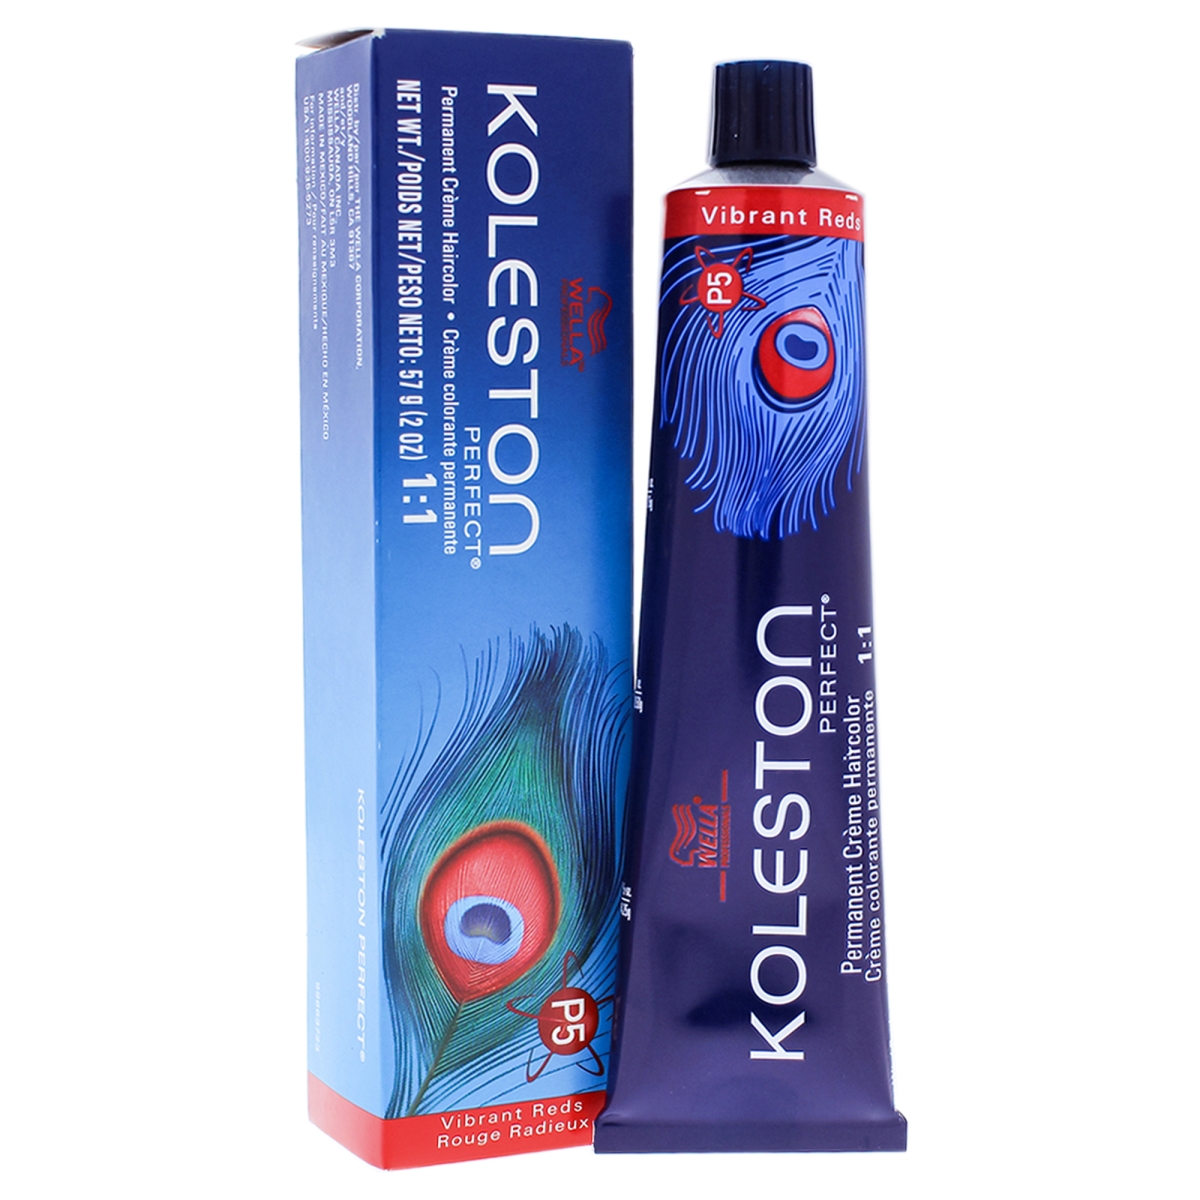 I0086526 Koleston Perfect Permanent Creme Hair Color For Unisex - 55 44 Intense Light Brown & Red Red - 2 Oz